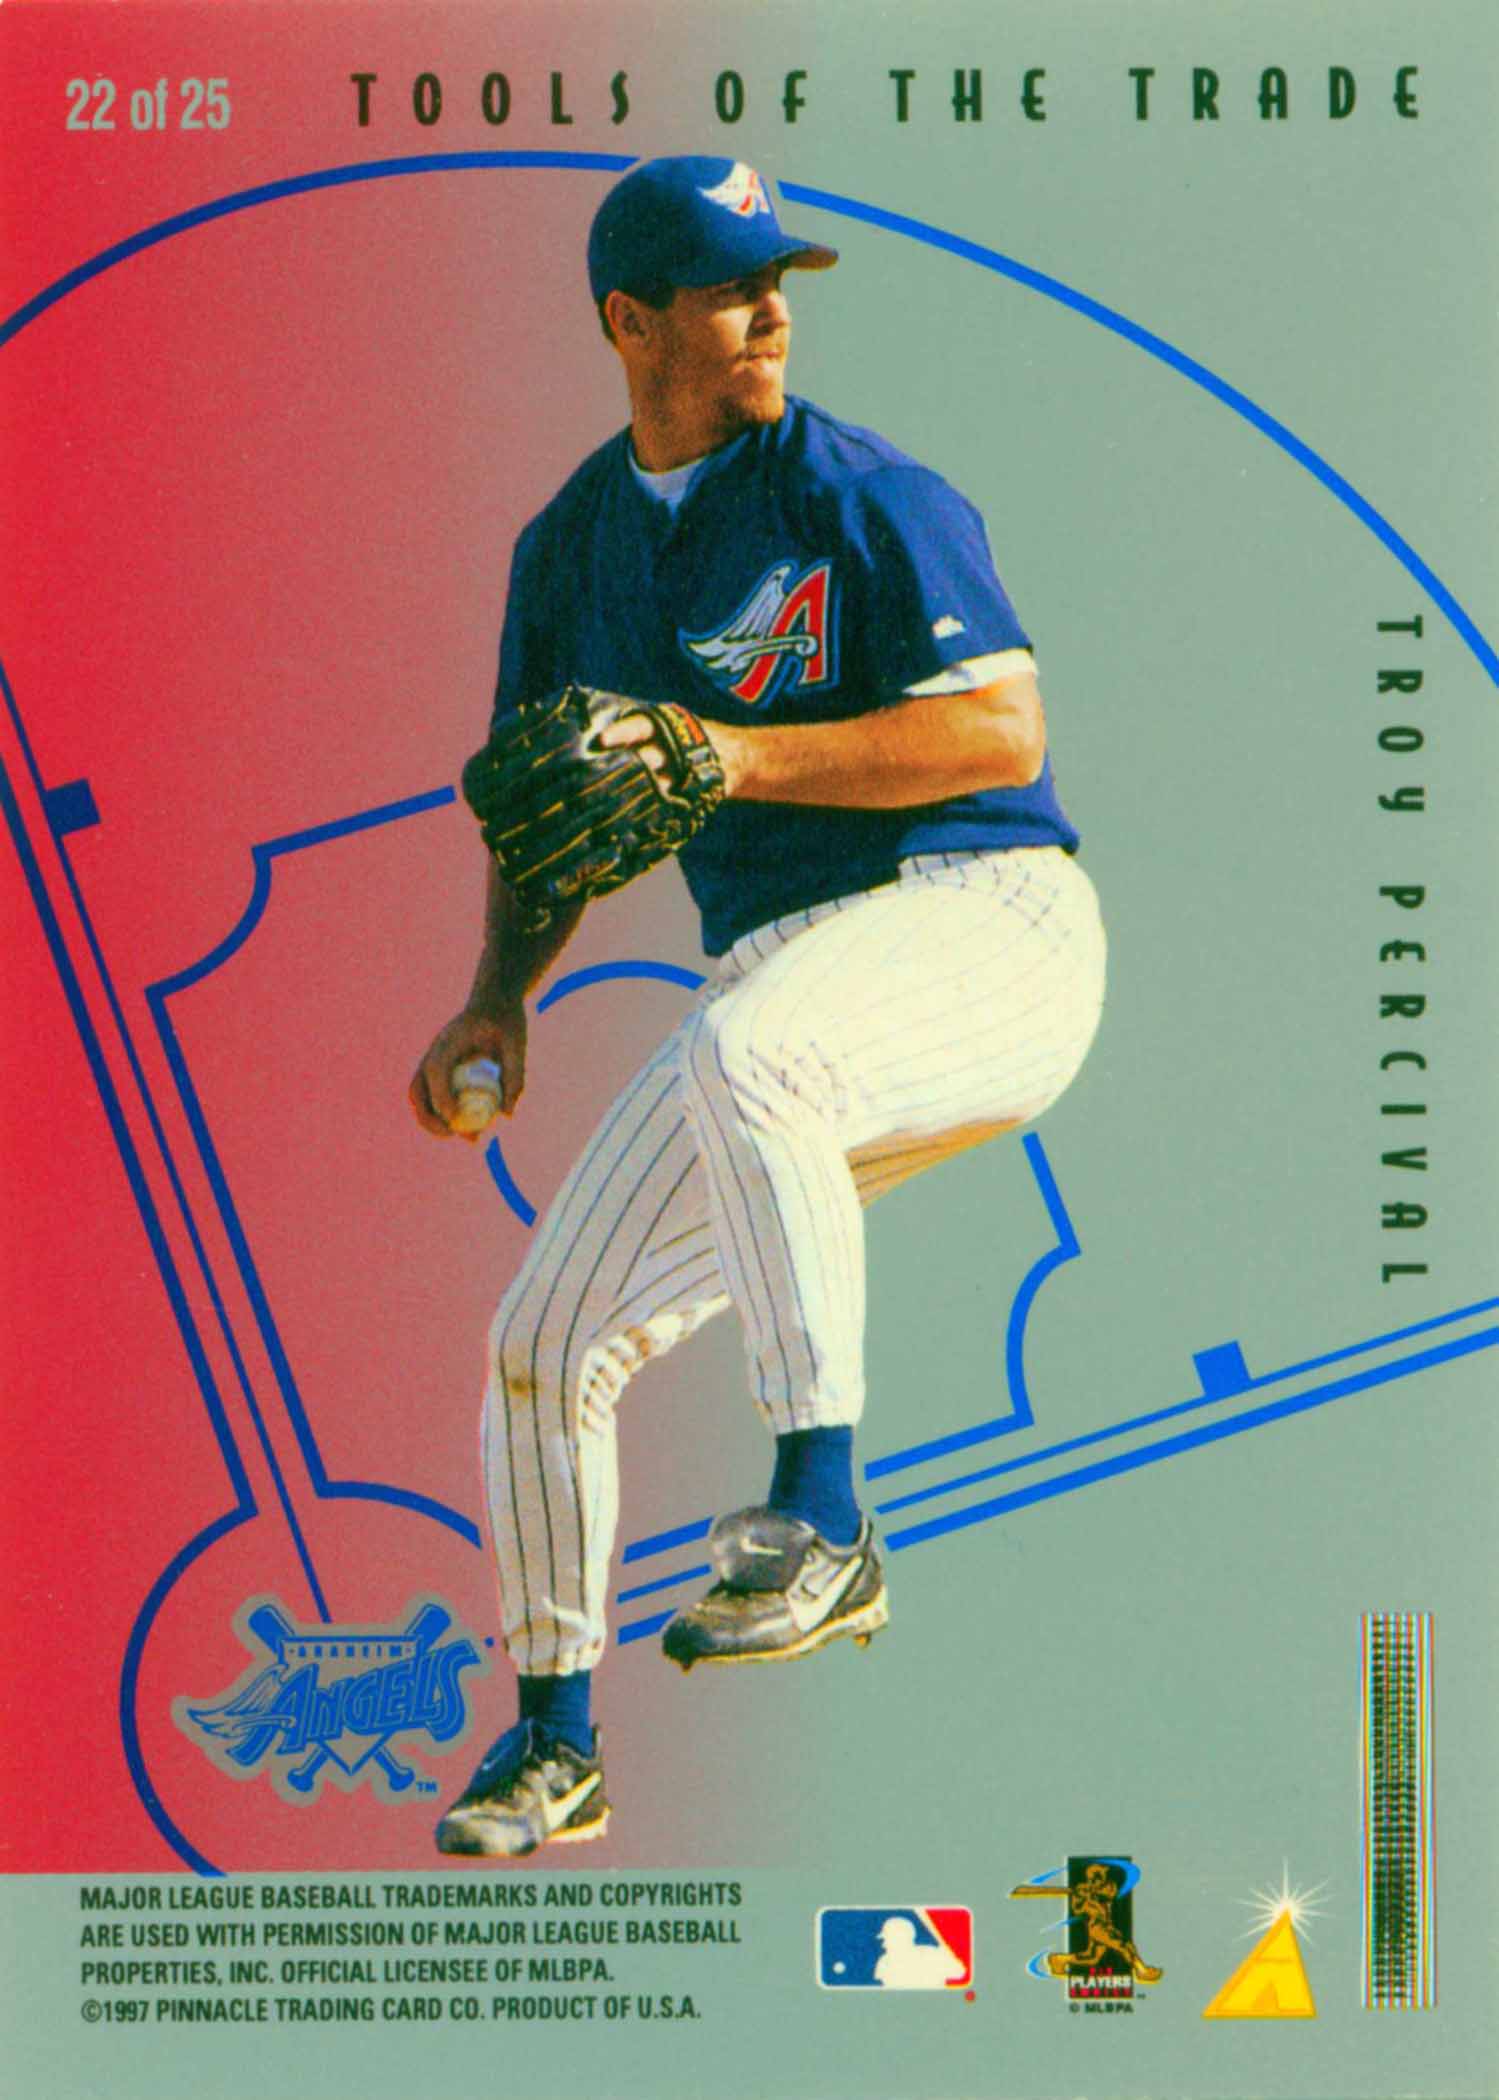  1997 Topps #156 Troy Percival NM-MT Anaheim Angels Baseball :  Collectibles & Fine Art